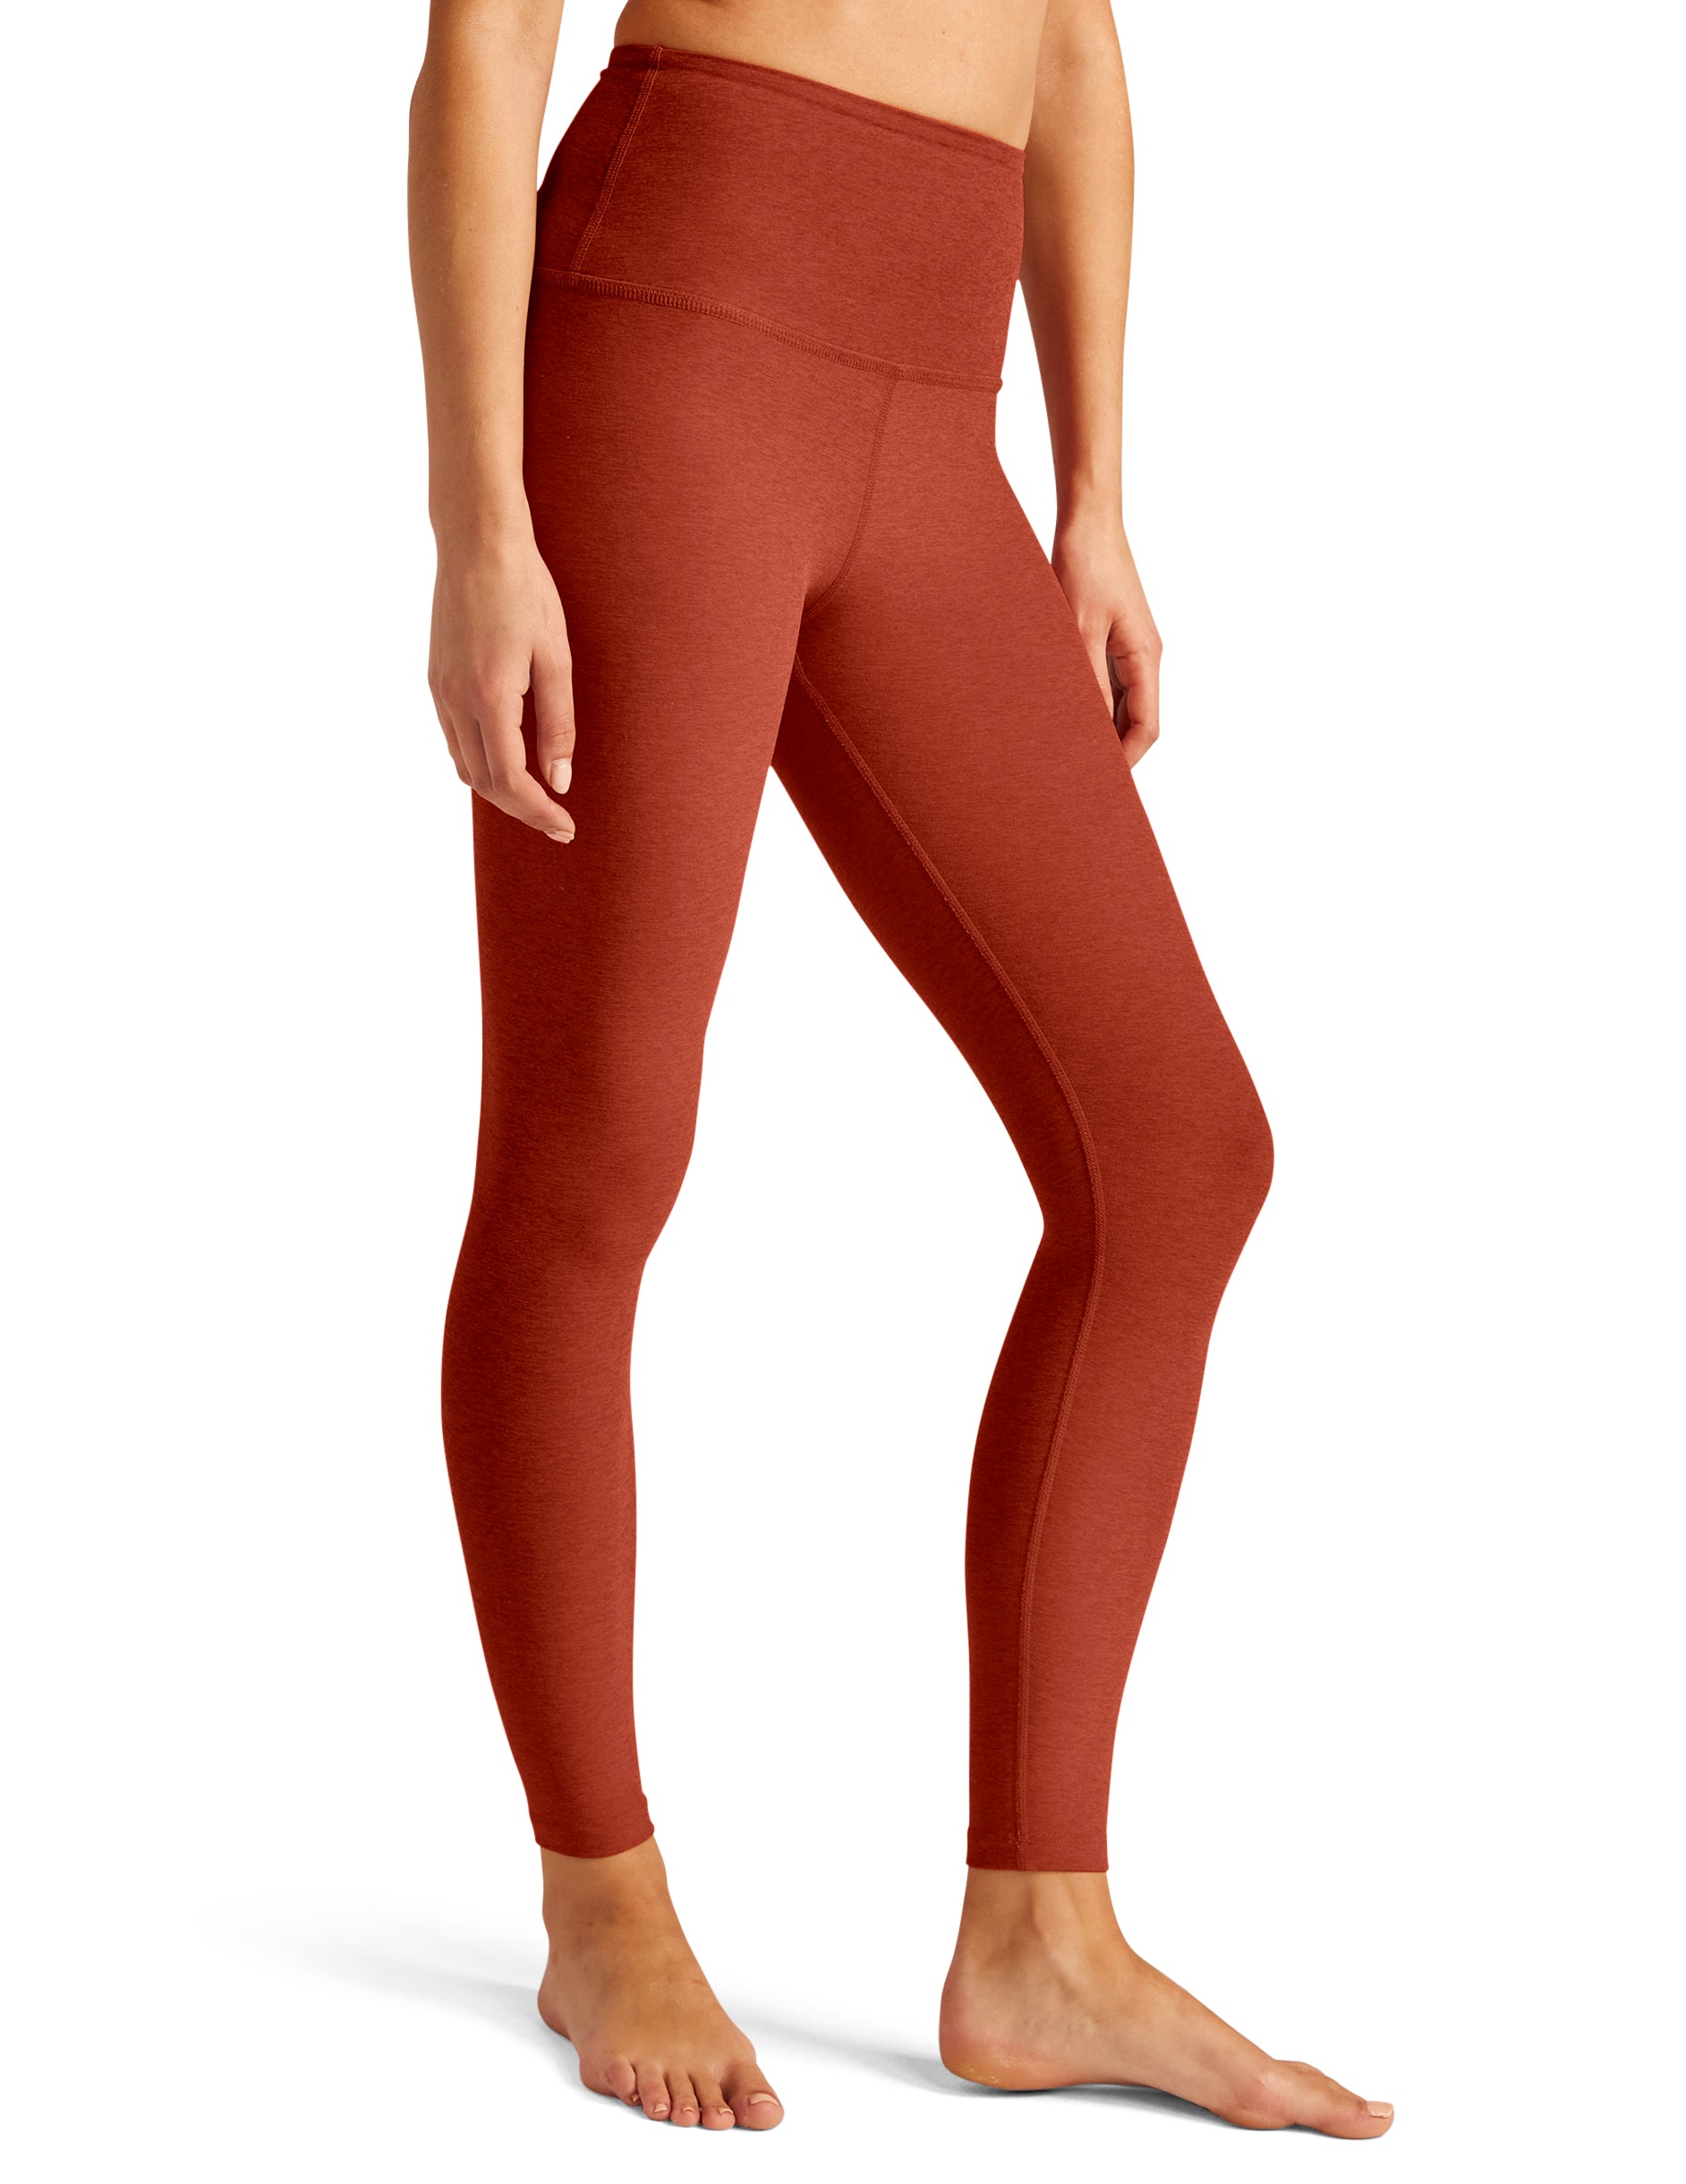 Spacedye Caught in the Midi High Waisted Legging- Red Sand Heather